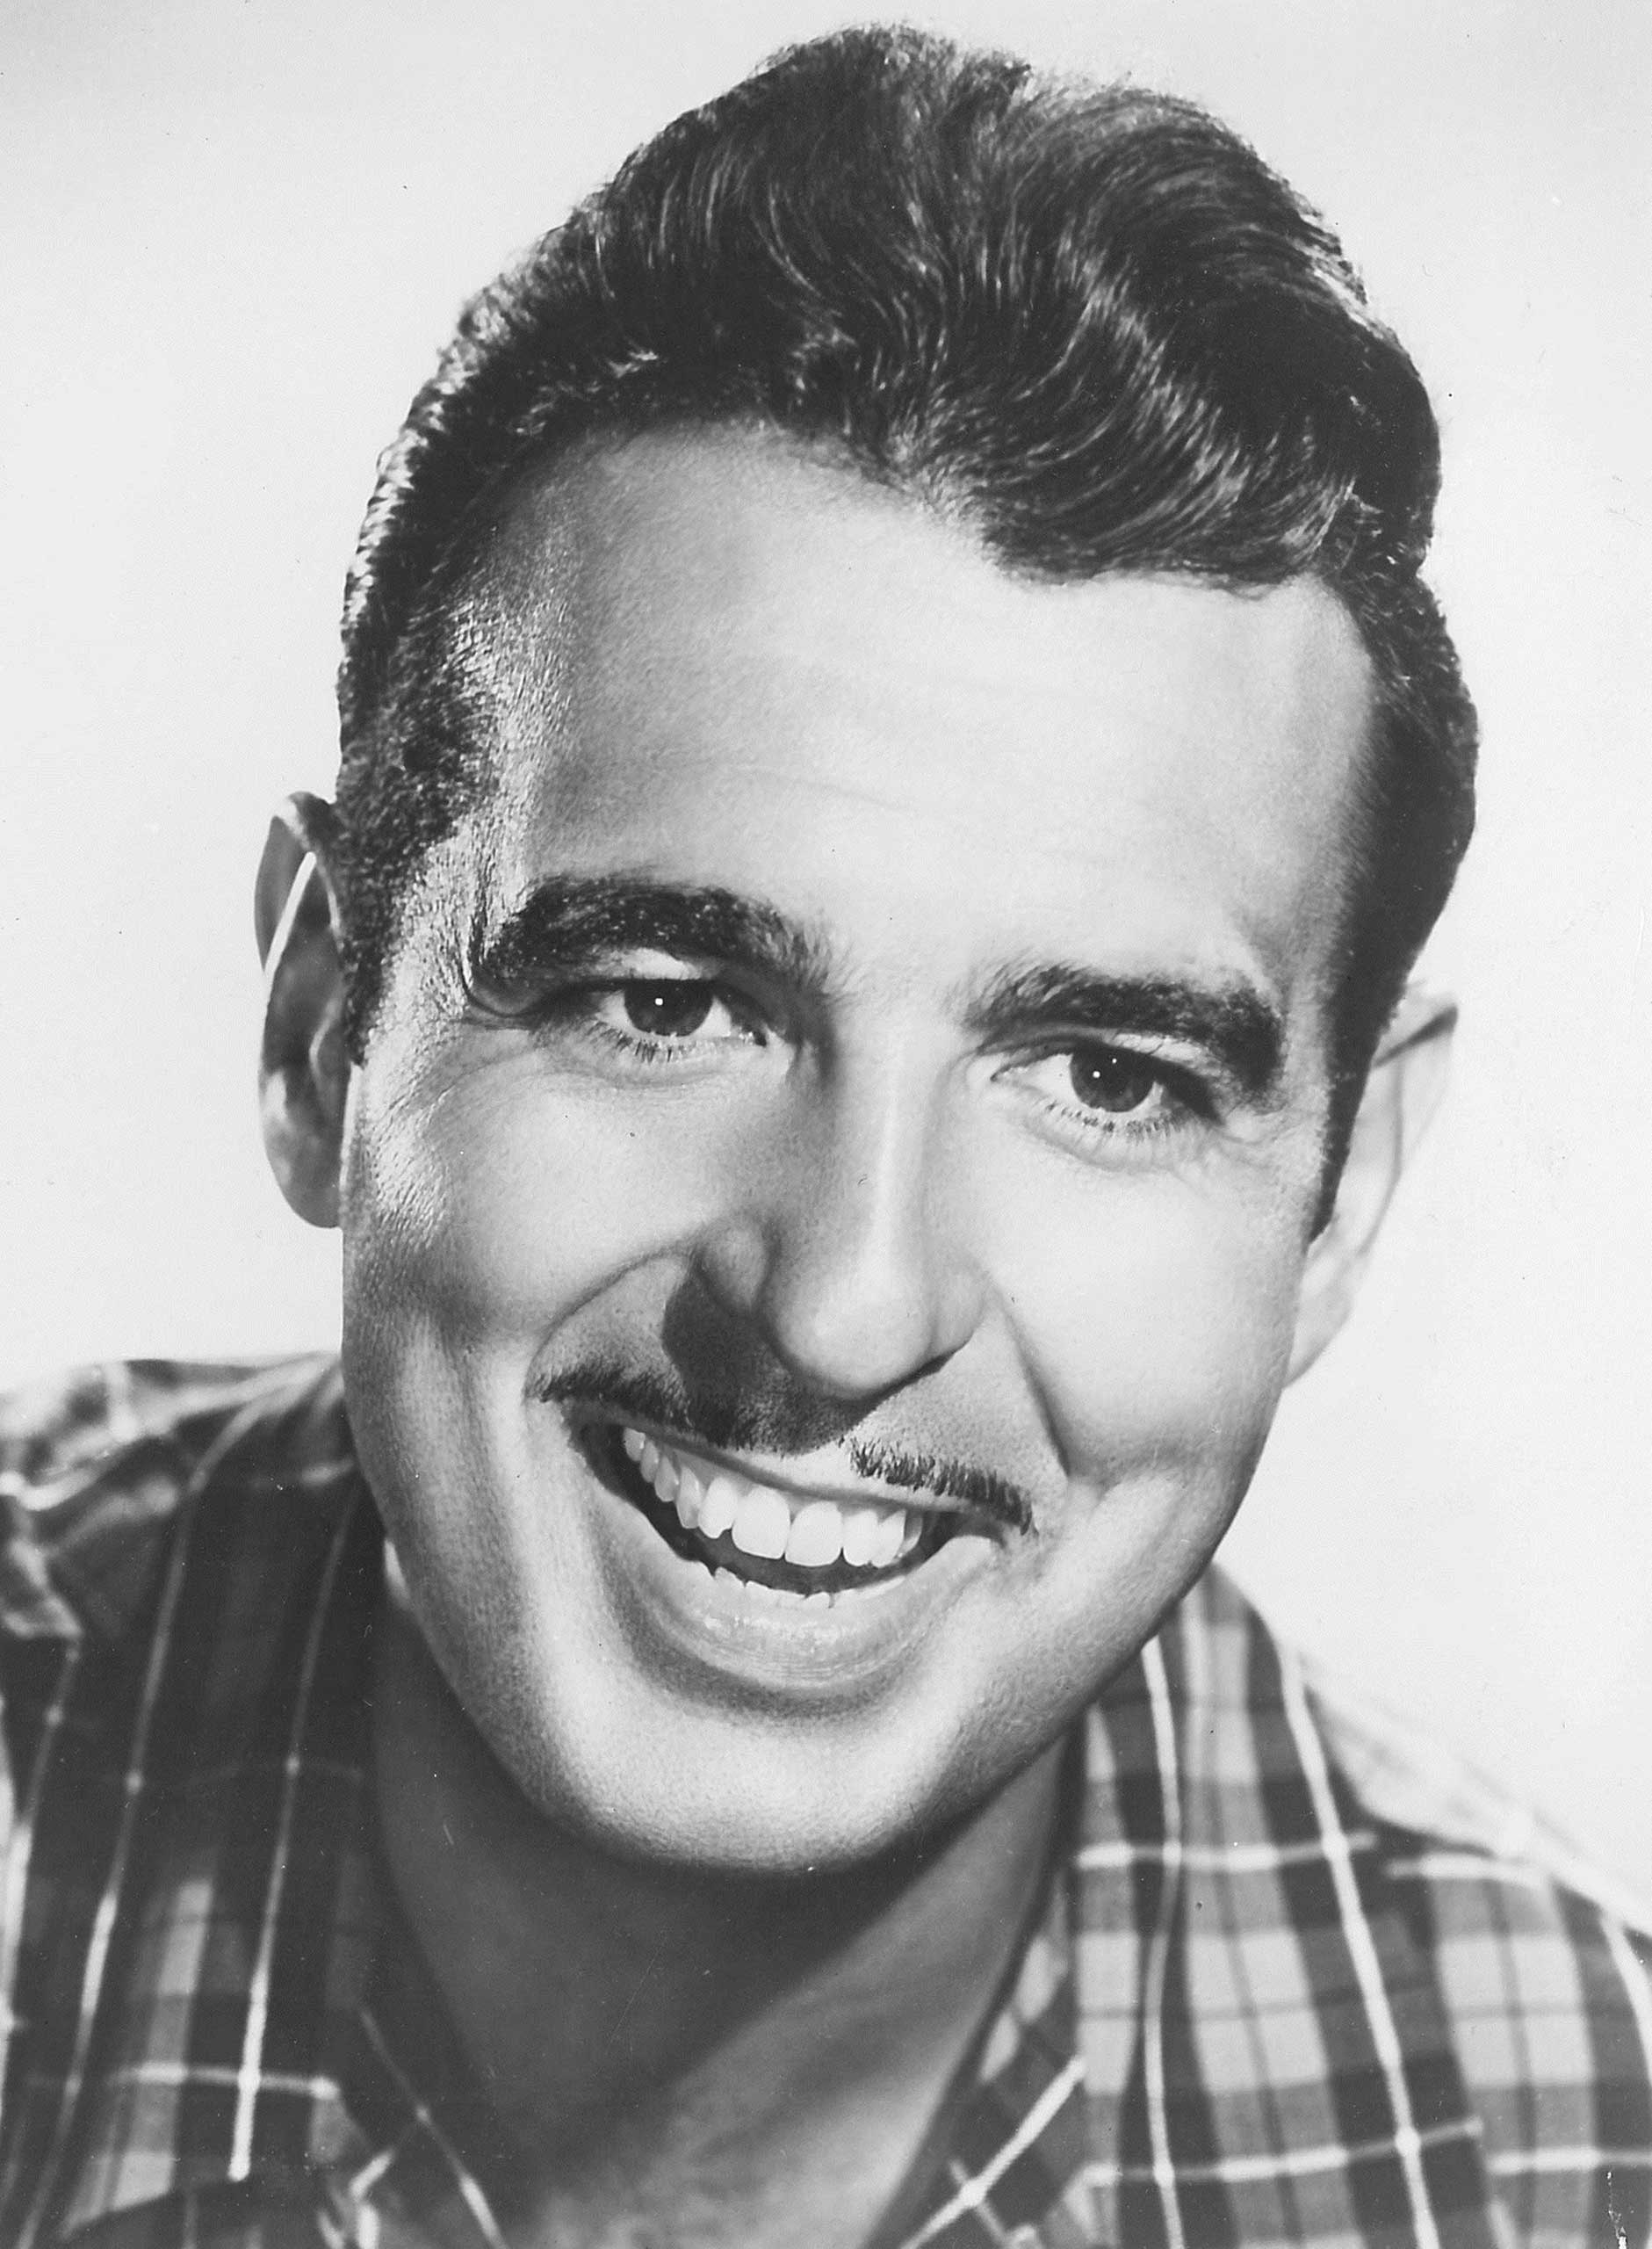 Tennessee Ernie Ford. Library of Congress Collections.